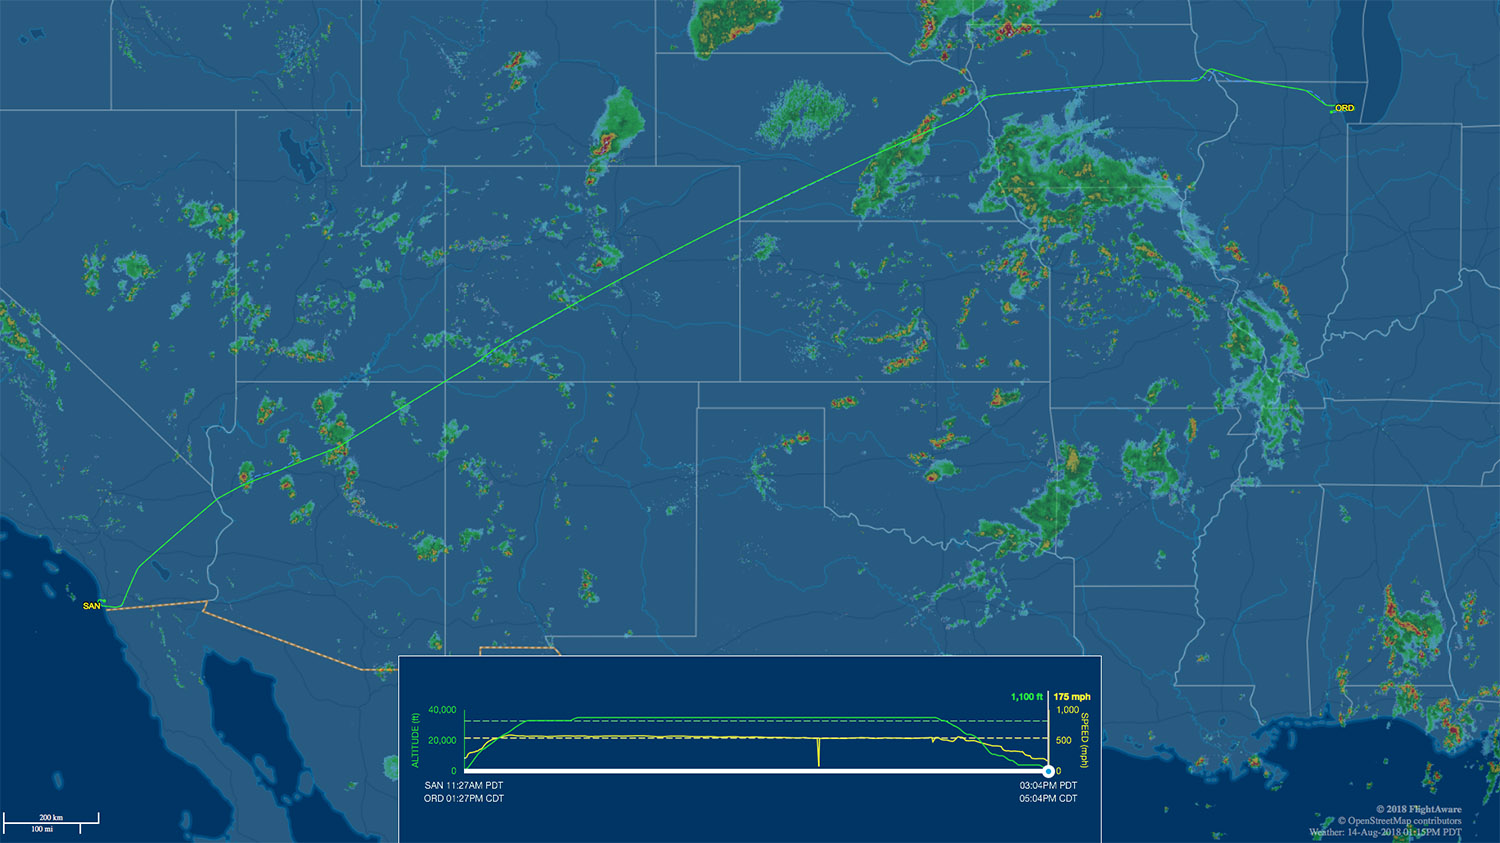 SAN to ORD route map with weather